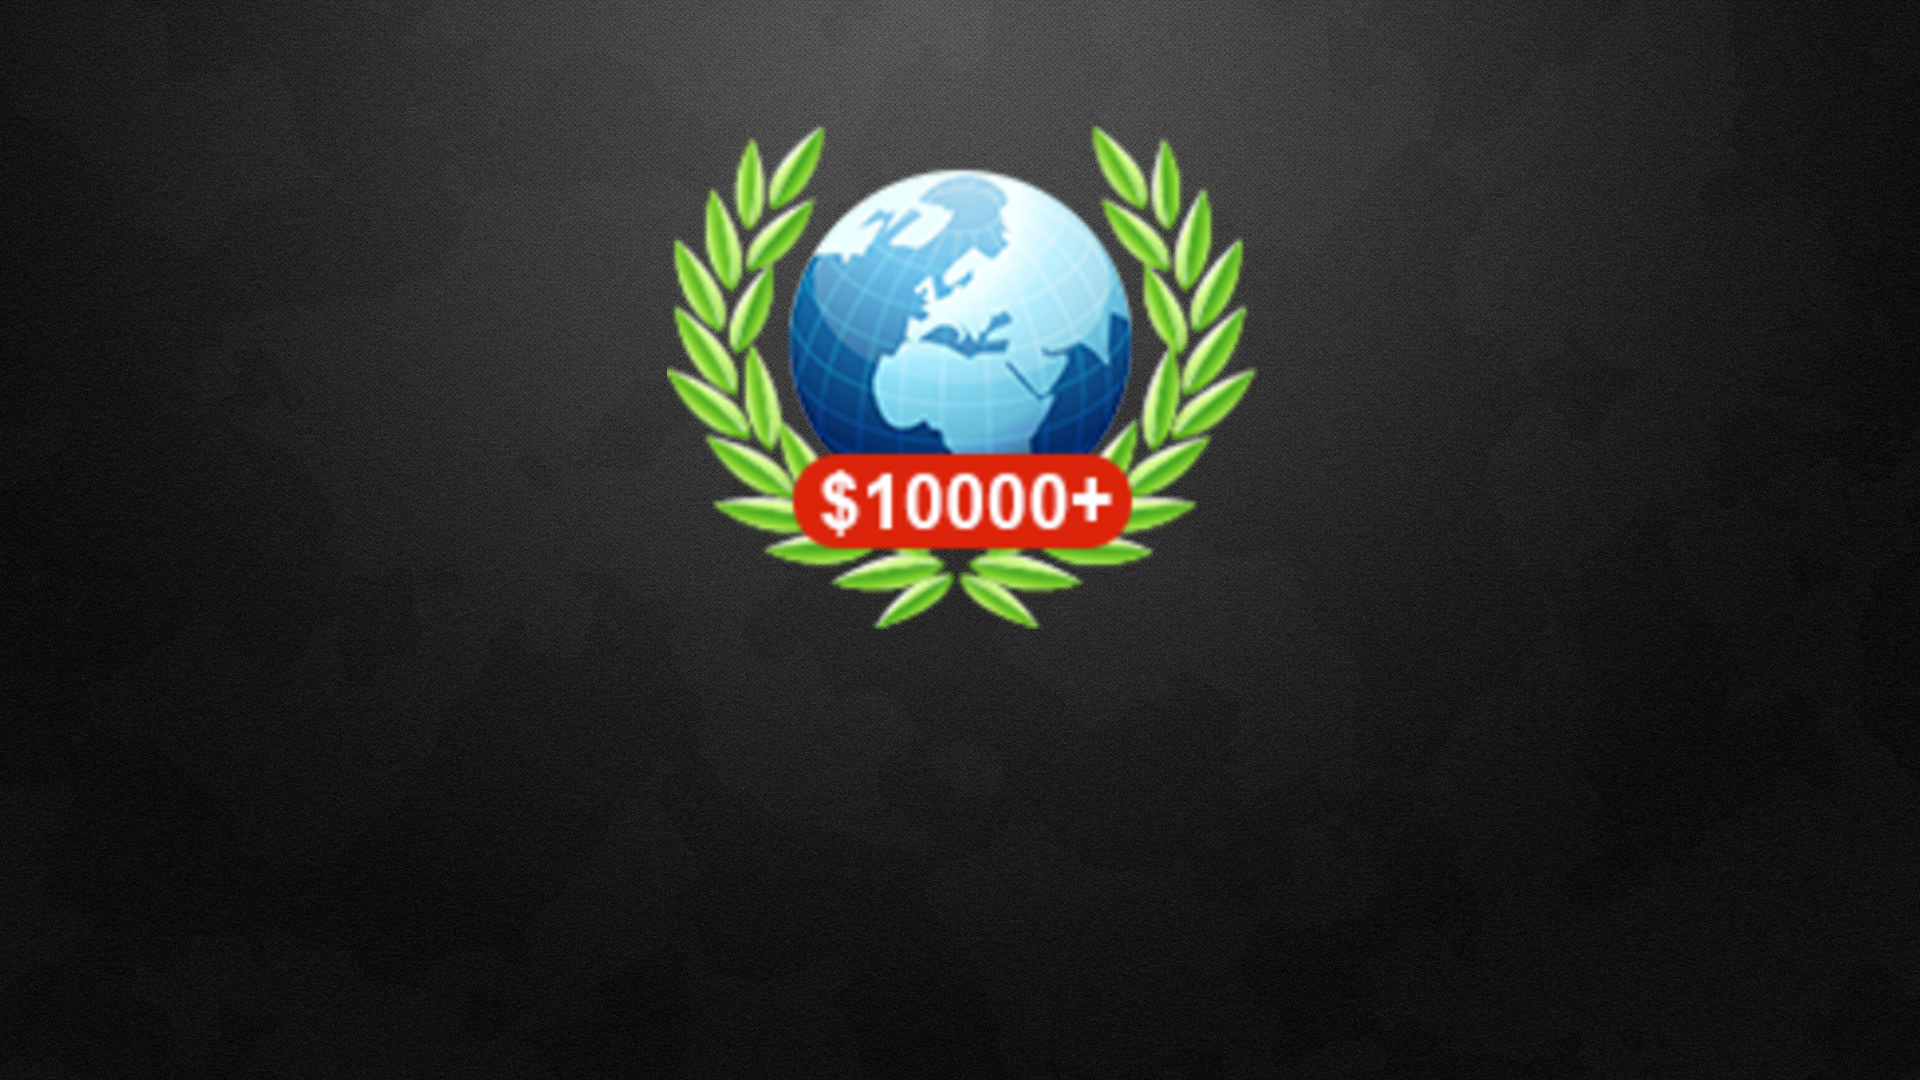 Win in online game finishing with $10 000+